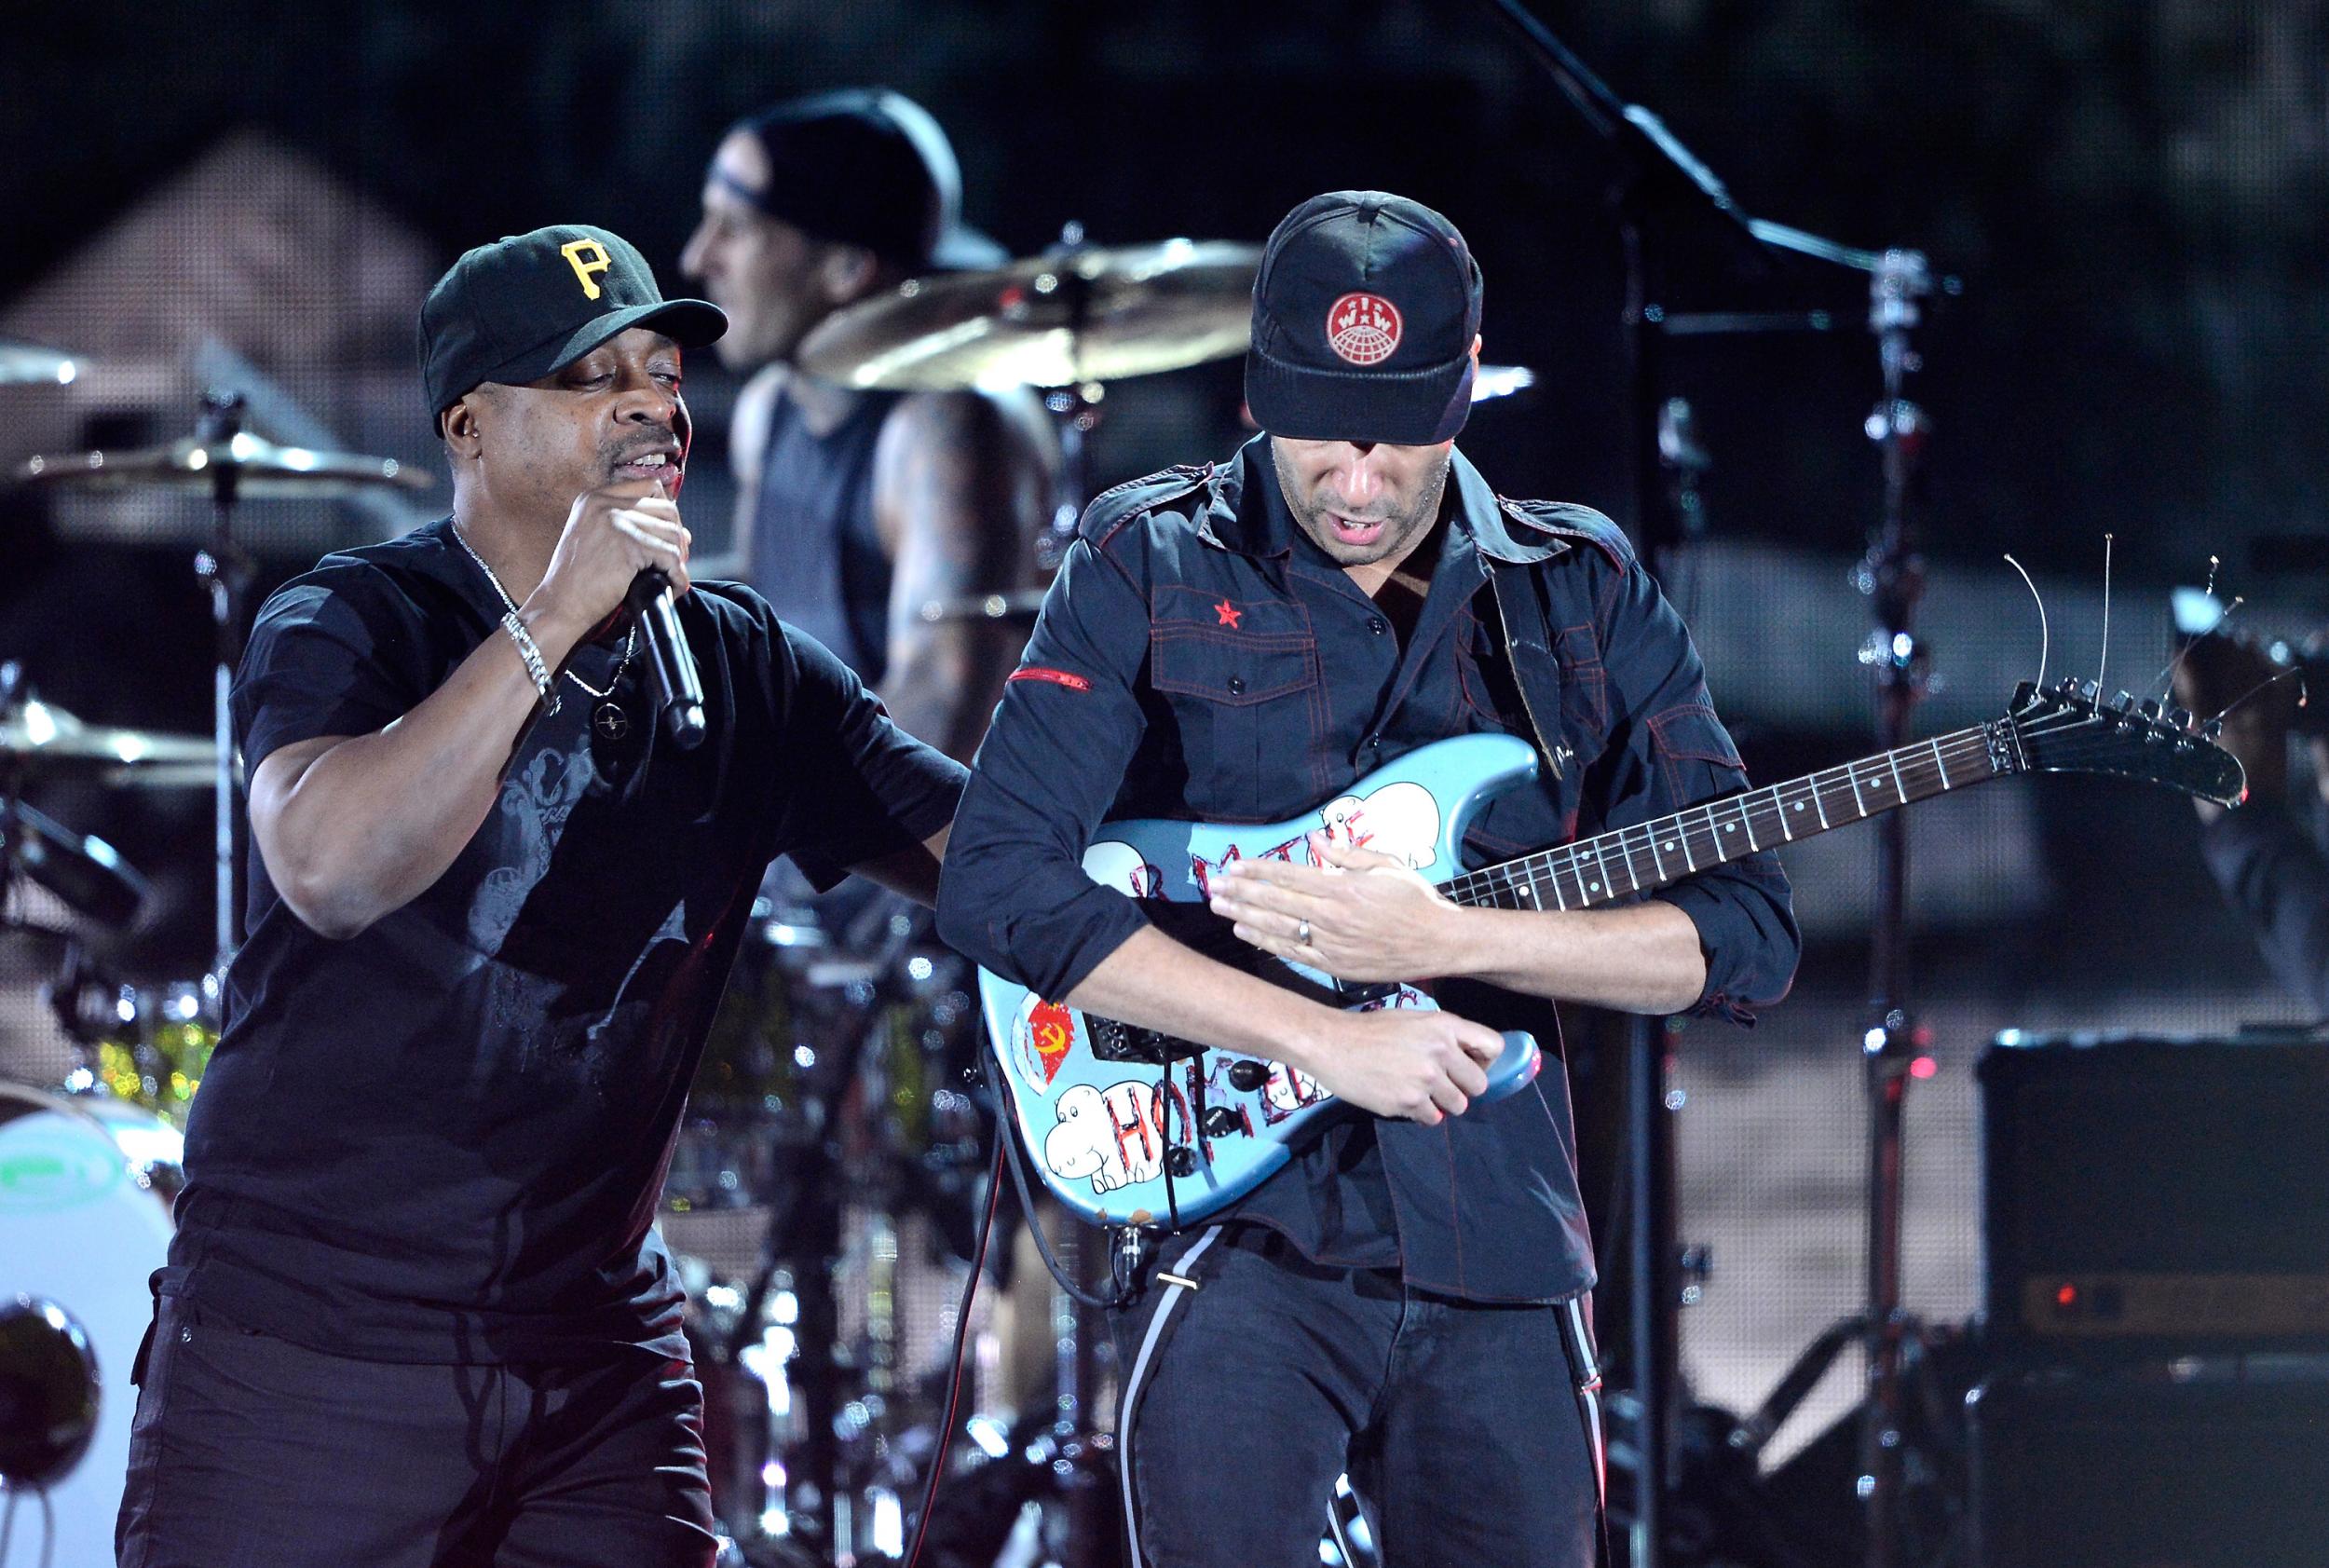 Chuck D and Tom Morello perform together at the 2013 Grammy Awards